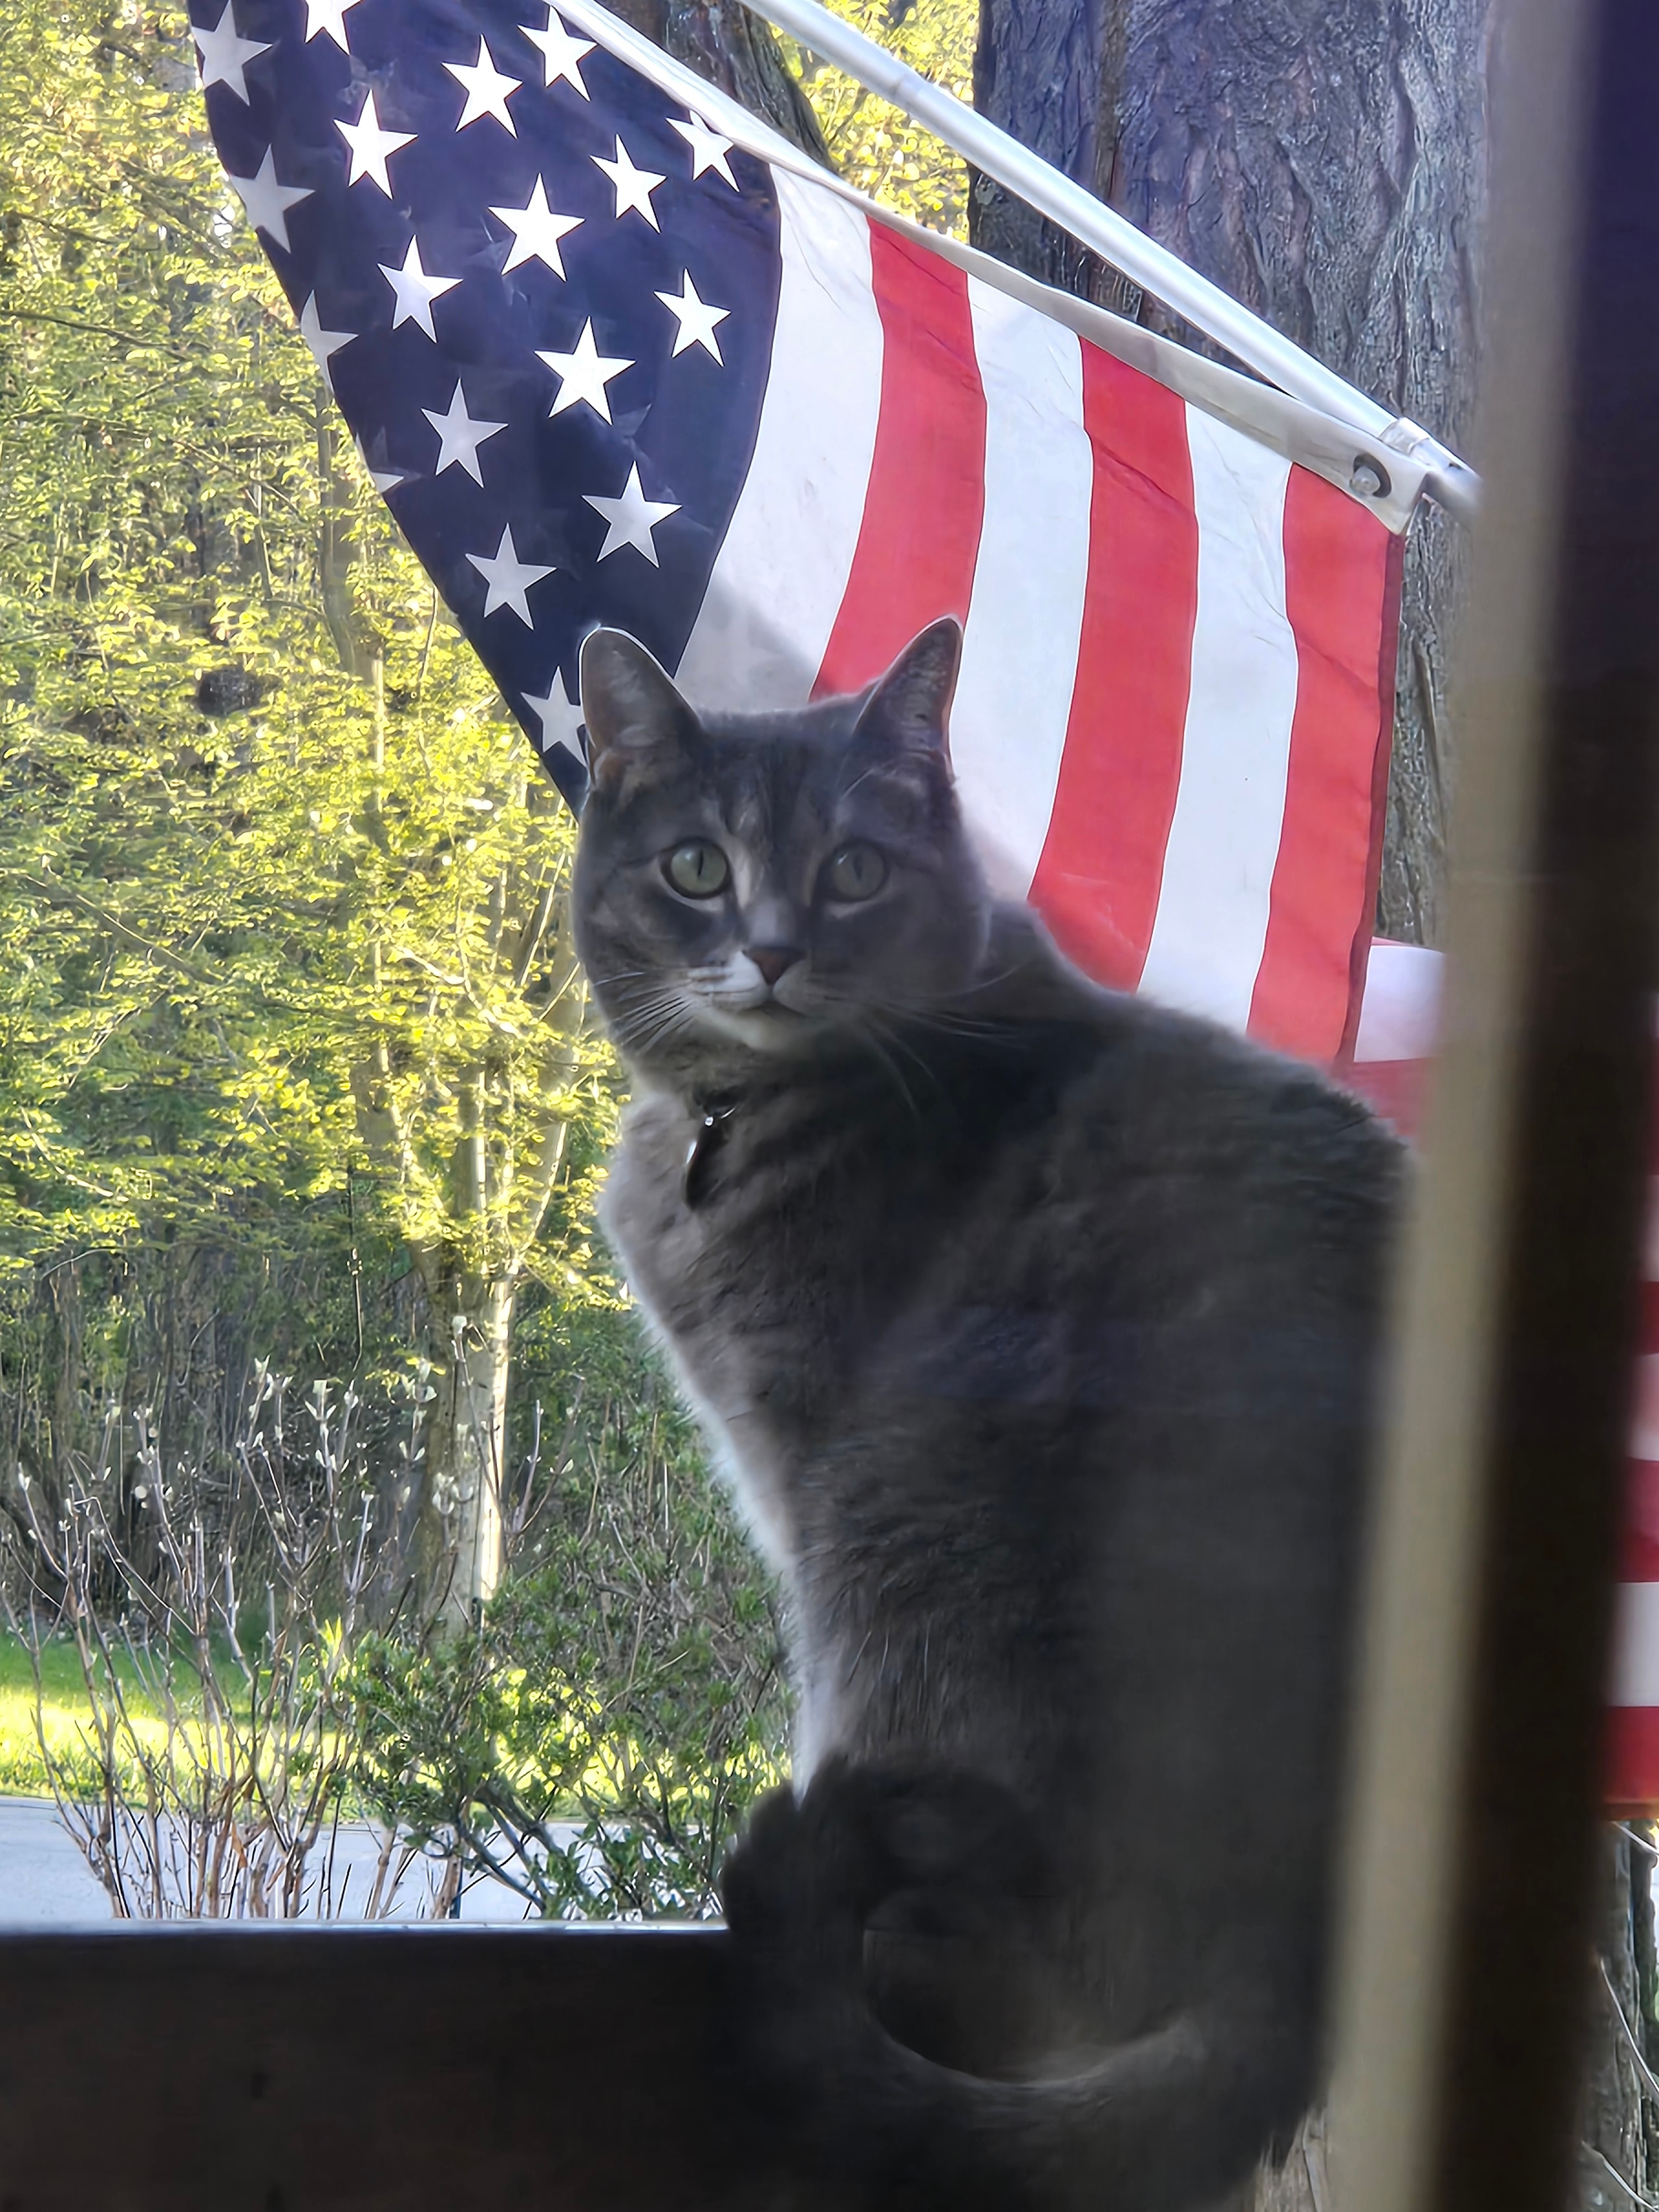 Our Patriotic Katan stalking the area birdies, when she's not eating snacks with her sisters